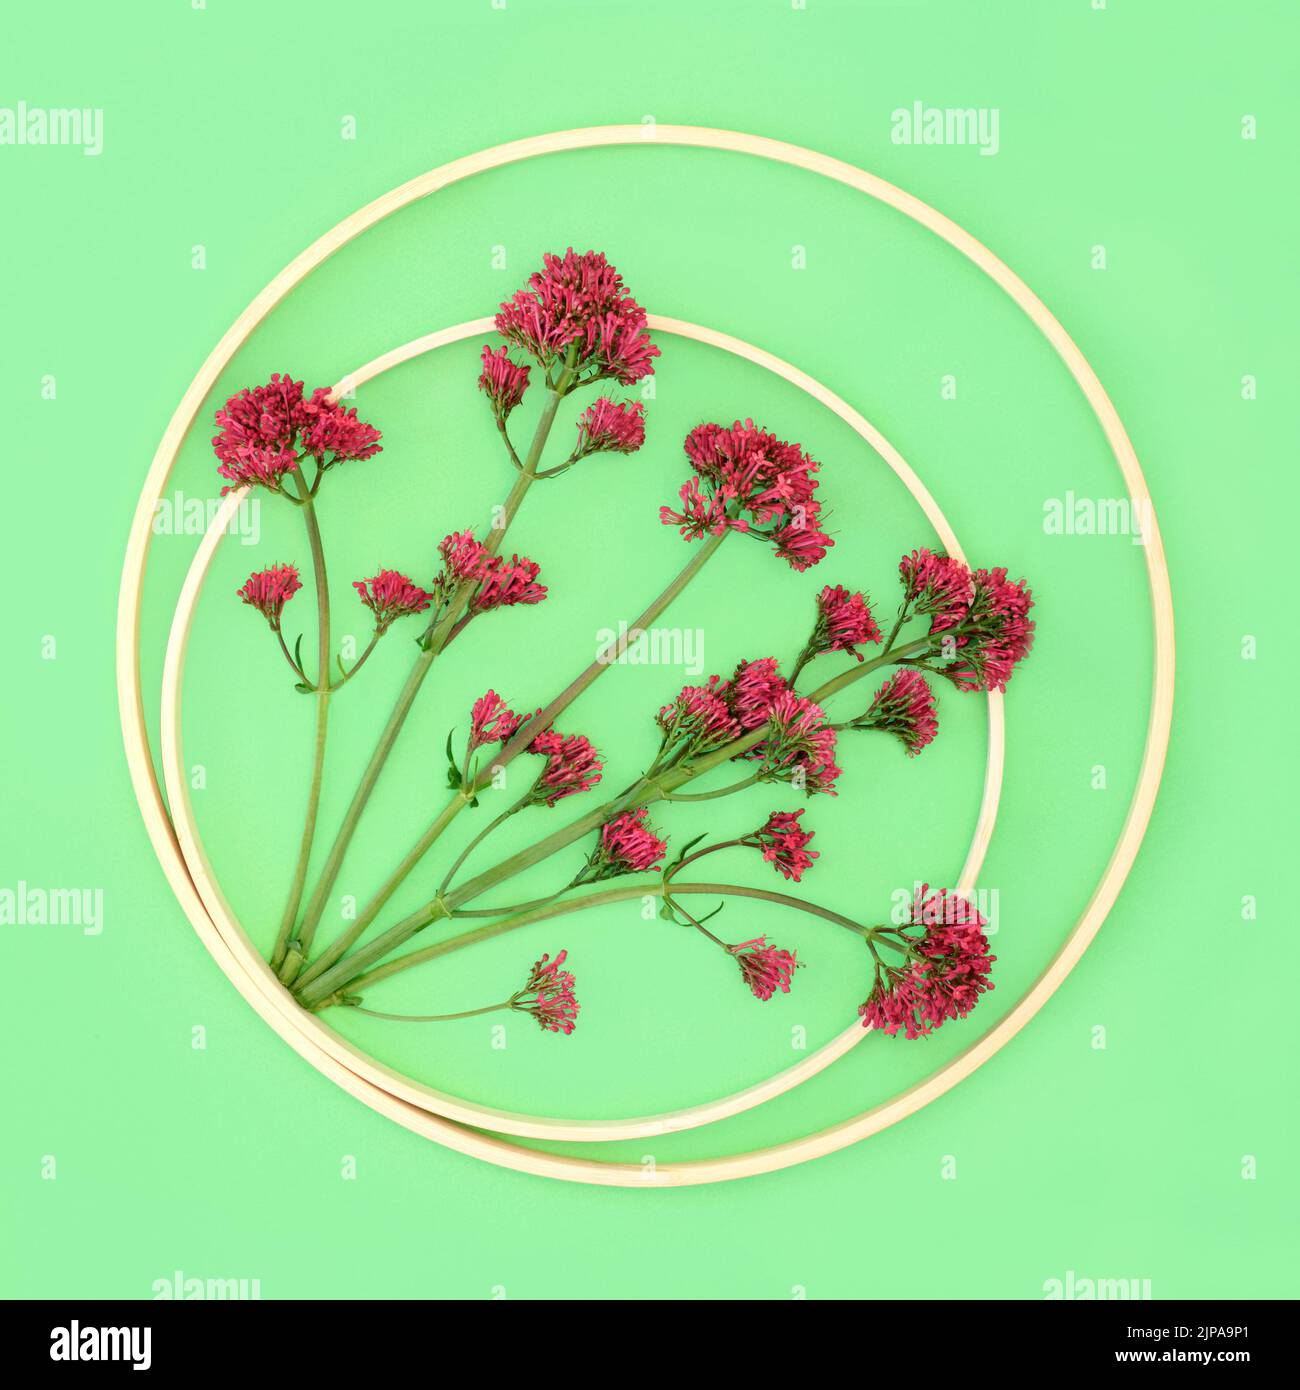 Red valerian herb plant in abstract circular frame. Flowers can be used to make perfume. Minimal botanical nature study composition. On green. Stock Photo